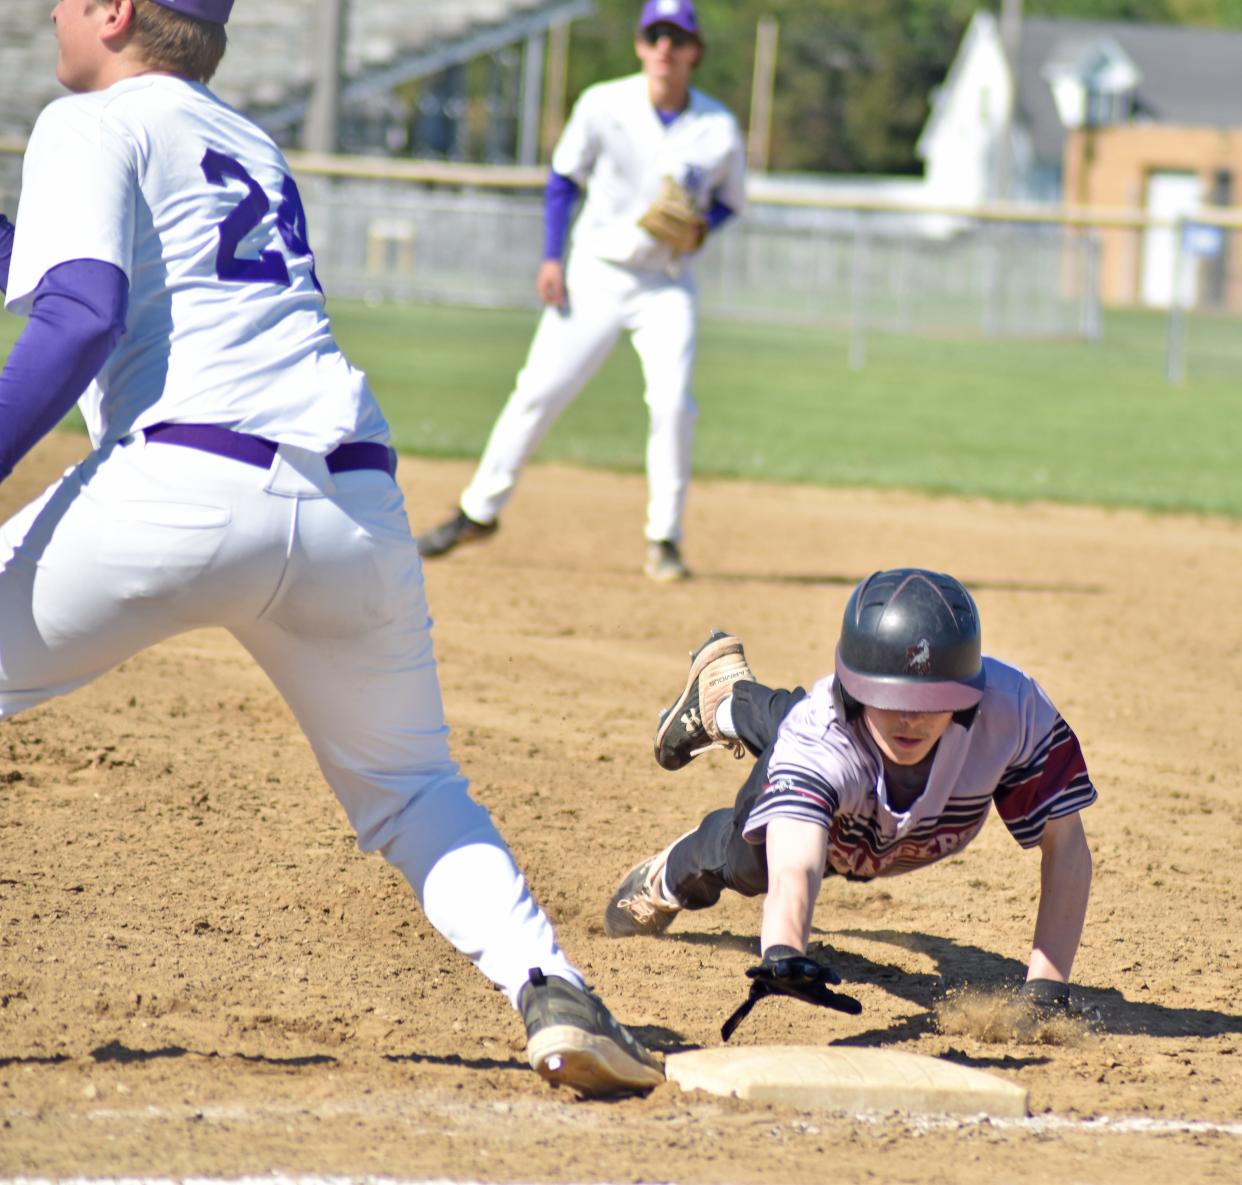 Union City's Ethan Neveraski dives safely back to first on an attempted pick off by Bronson. Bronson first baseman Carson Stevens awaits the throw.